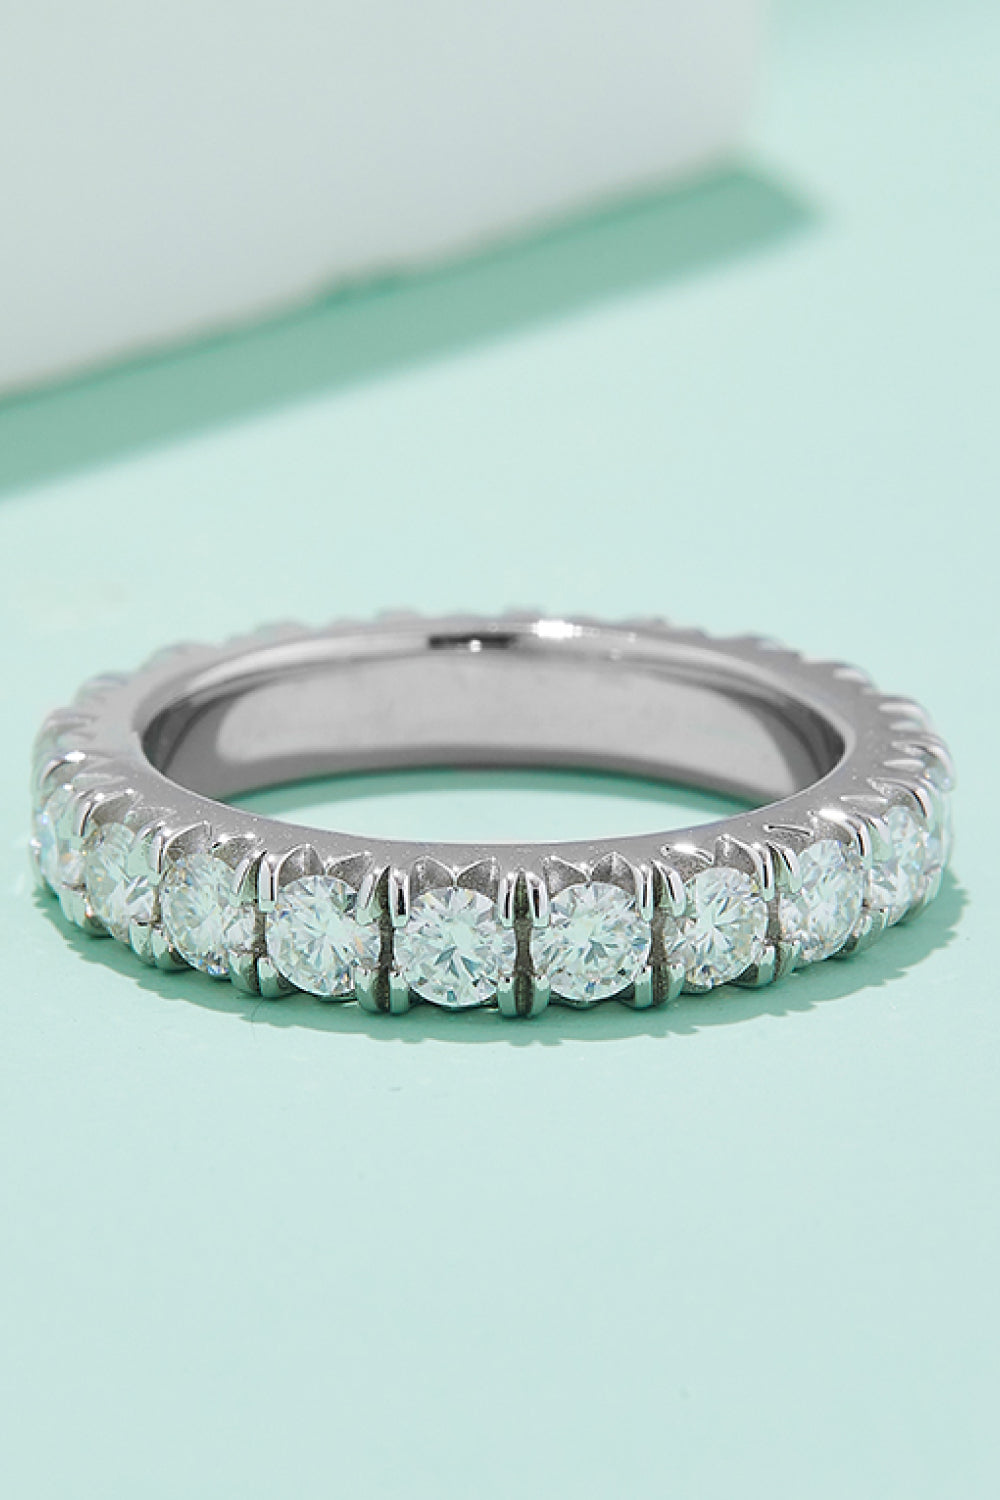 Jewelry 2.3 Carat Moissanite 925 Sterling Silver Eternity Ring